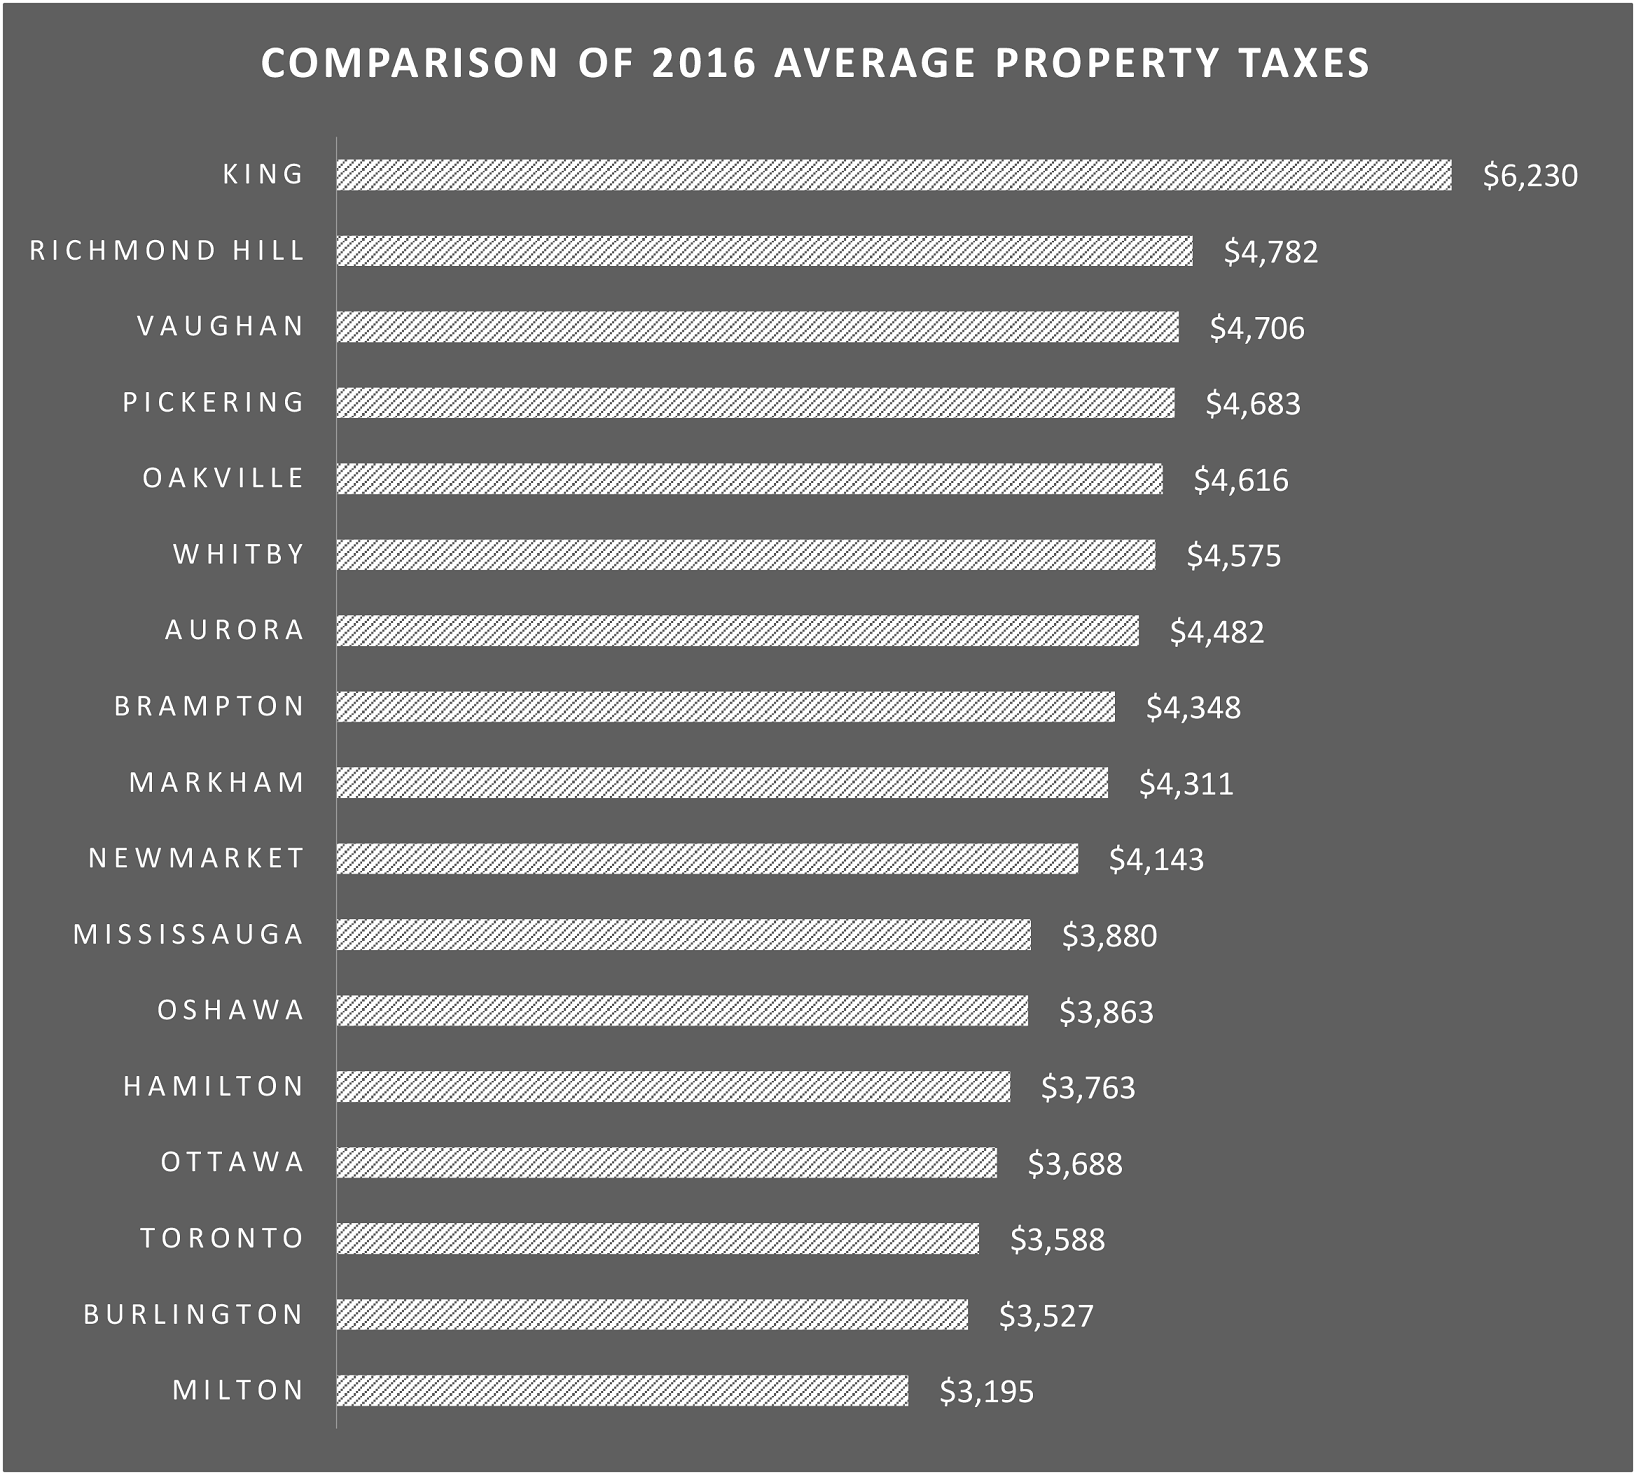 Toronto Property Taxes Among the Lowest